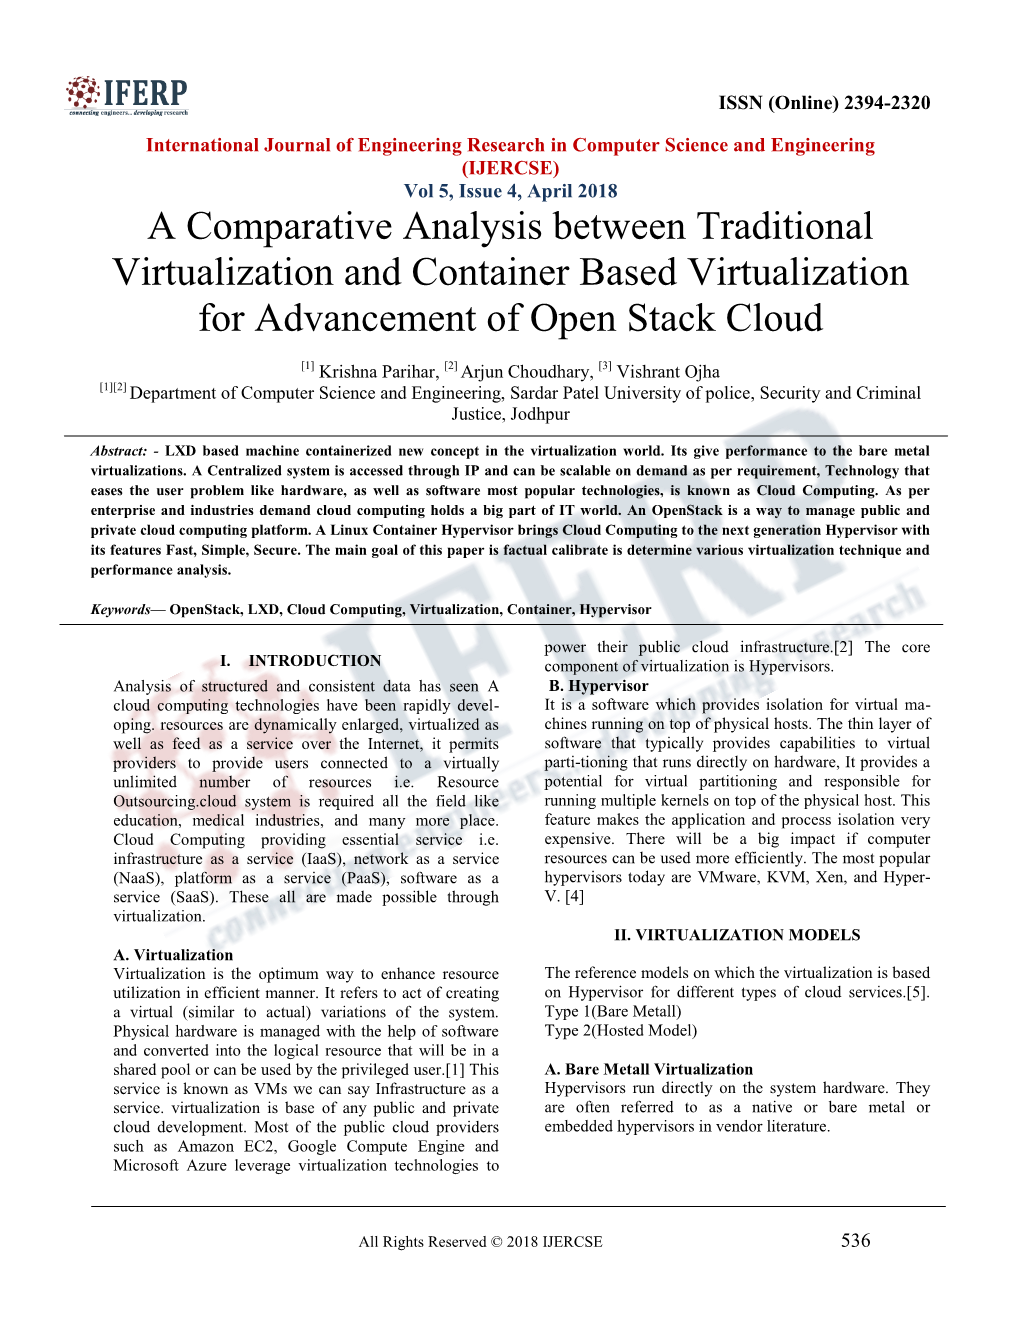 A Comparative Analysis Between Traditional Virtualization and Container Based Virtualization for Advancement of Open Stack Cloud